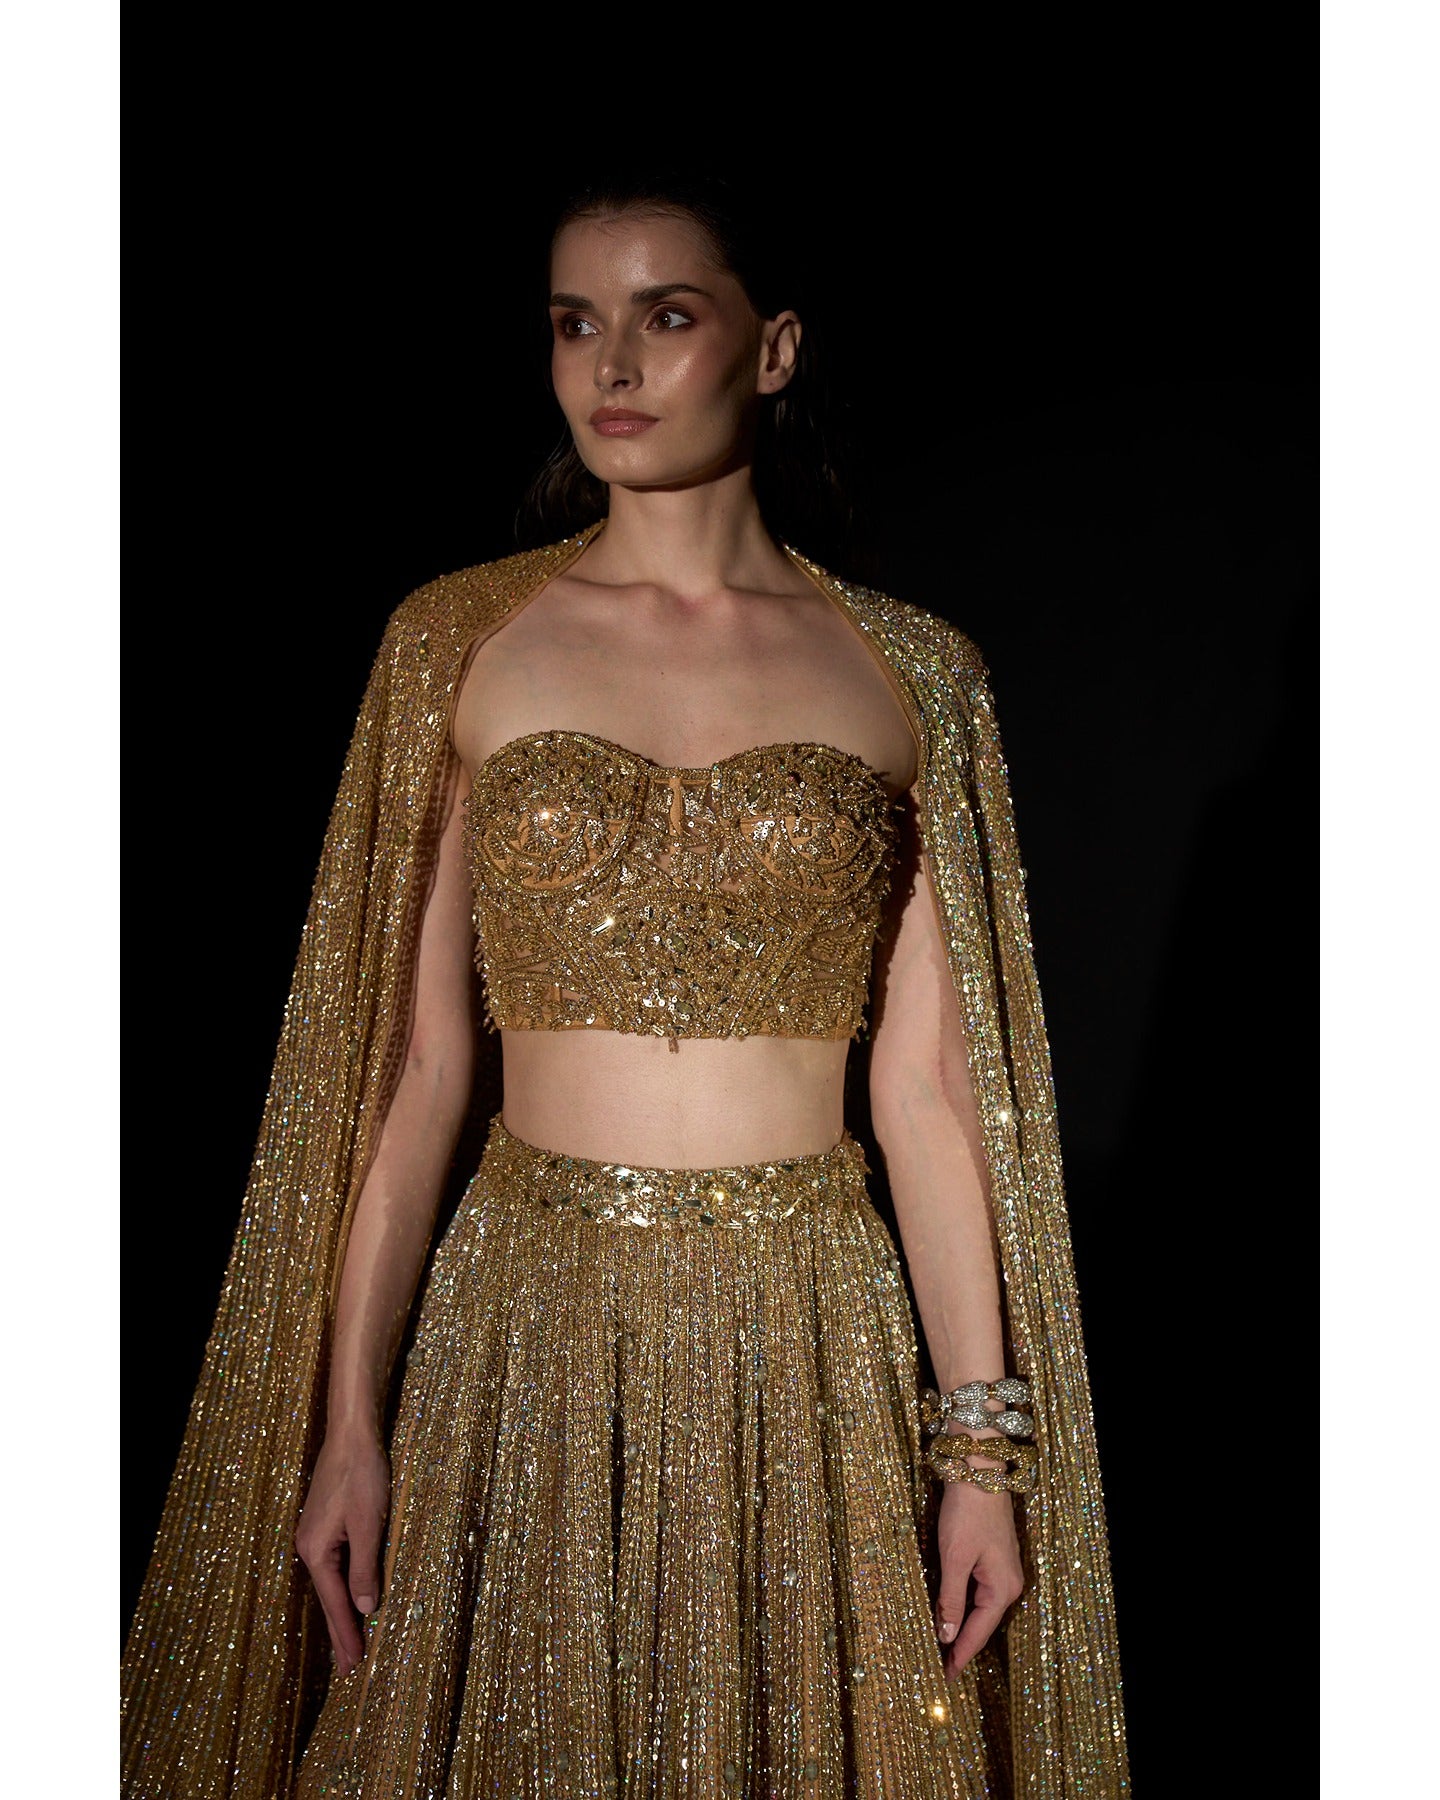 Elegance woven in threads, my lehenga tells a story of timeless grace. 